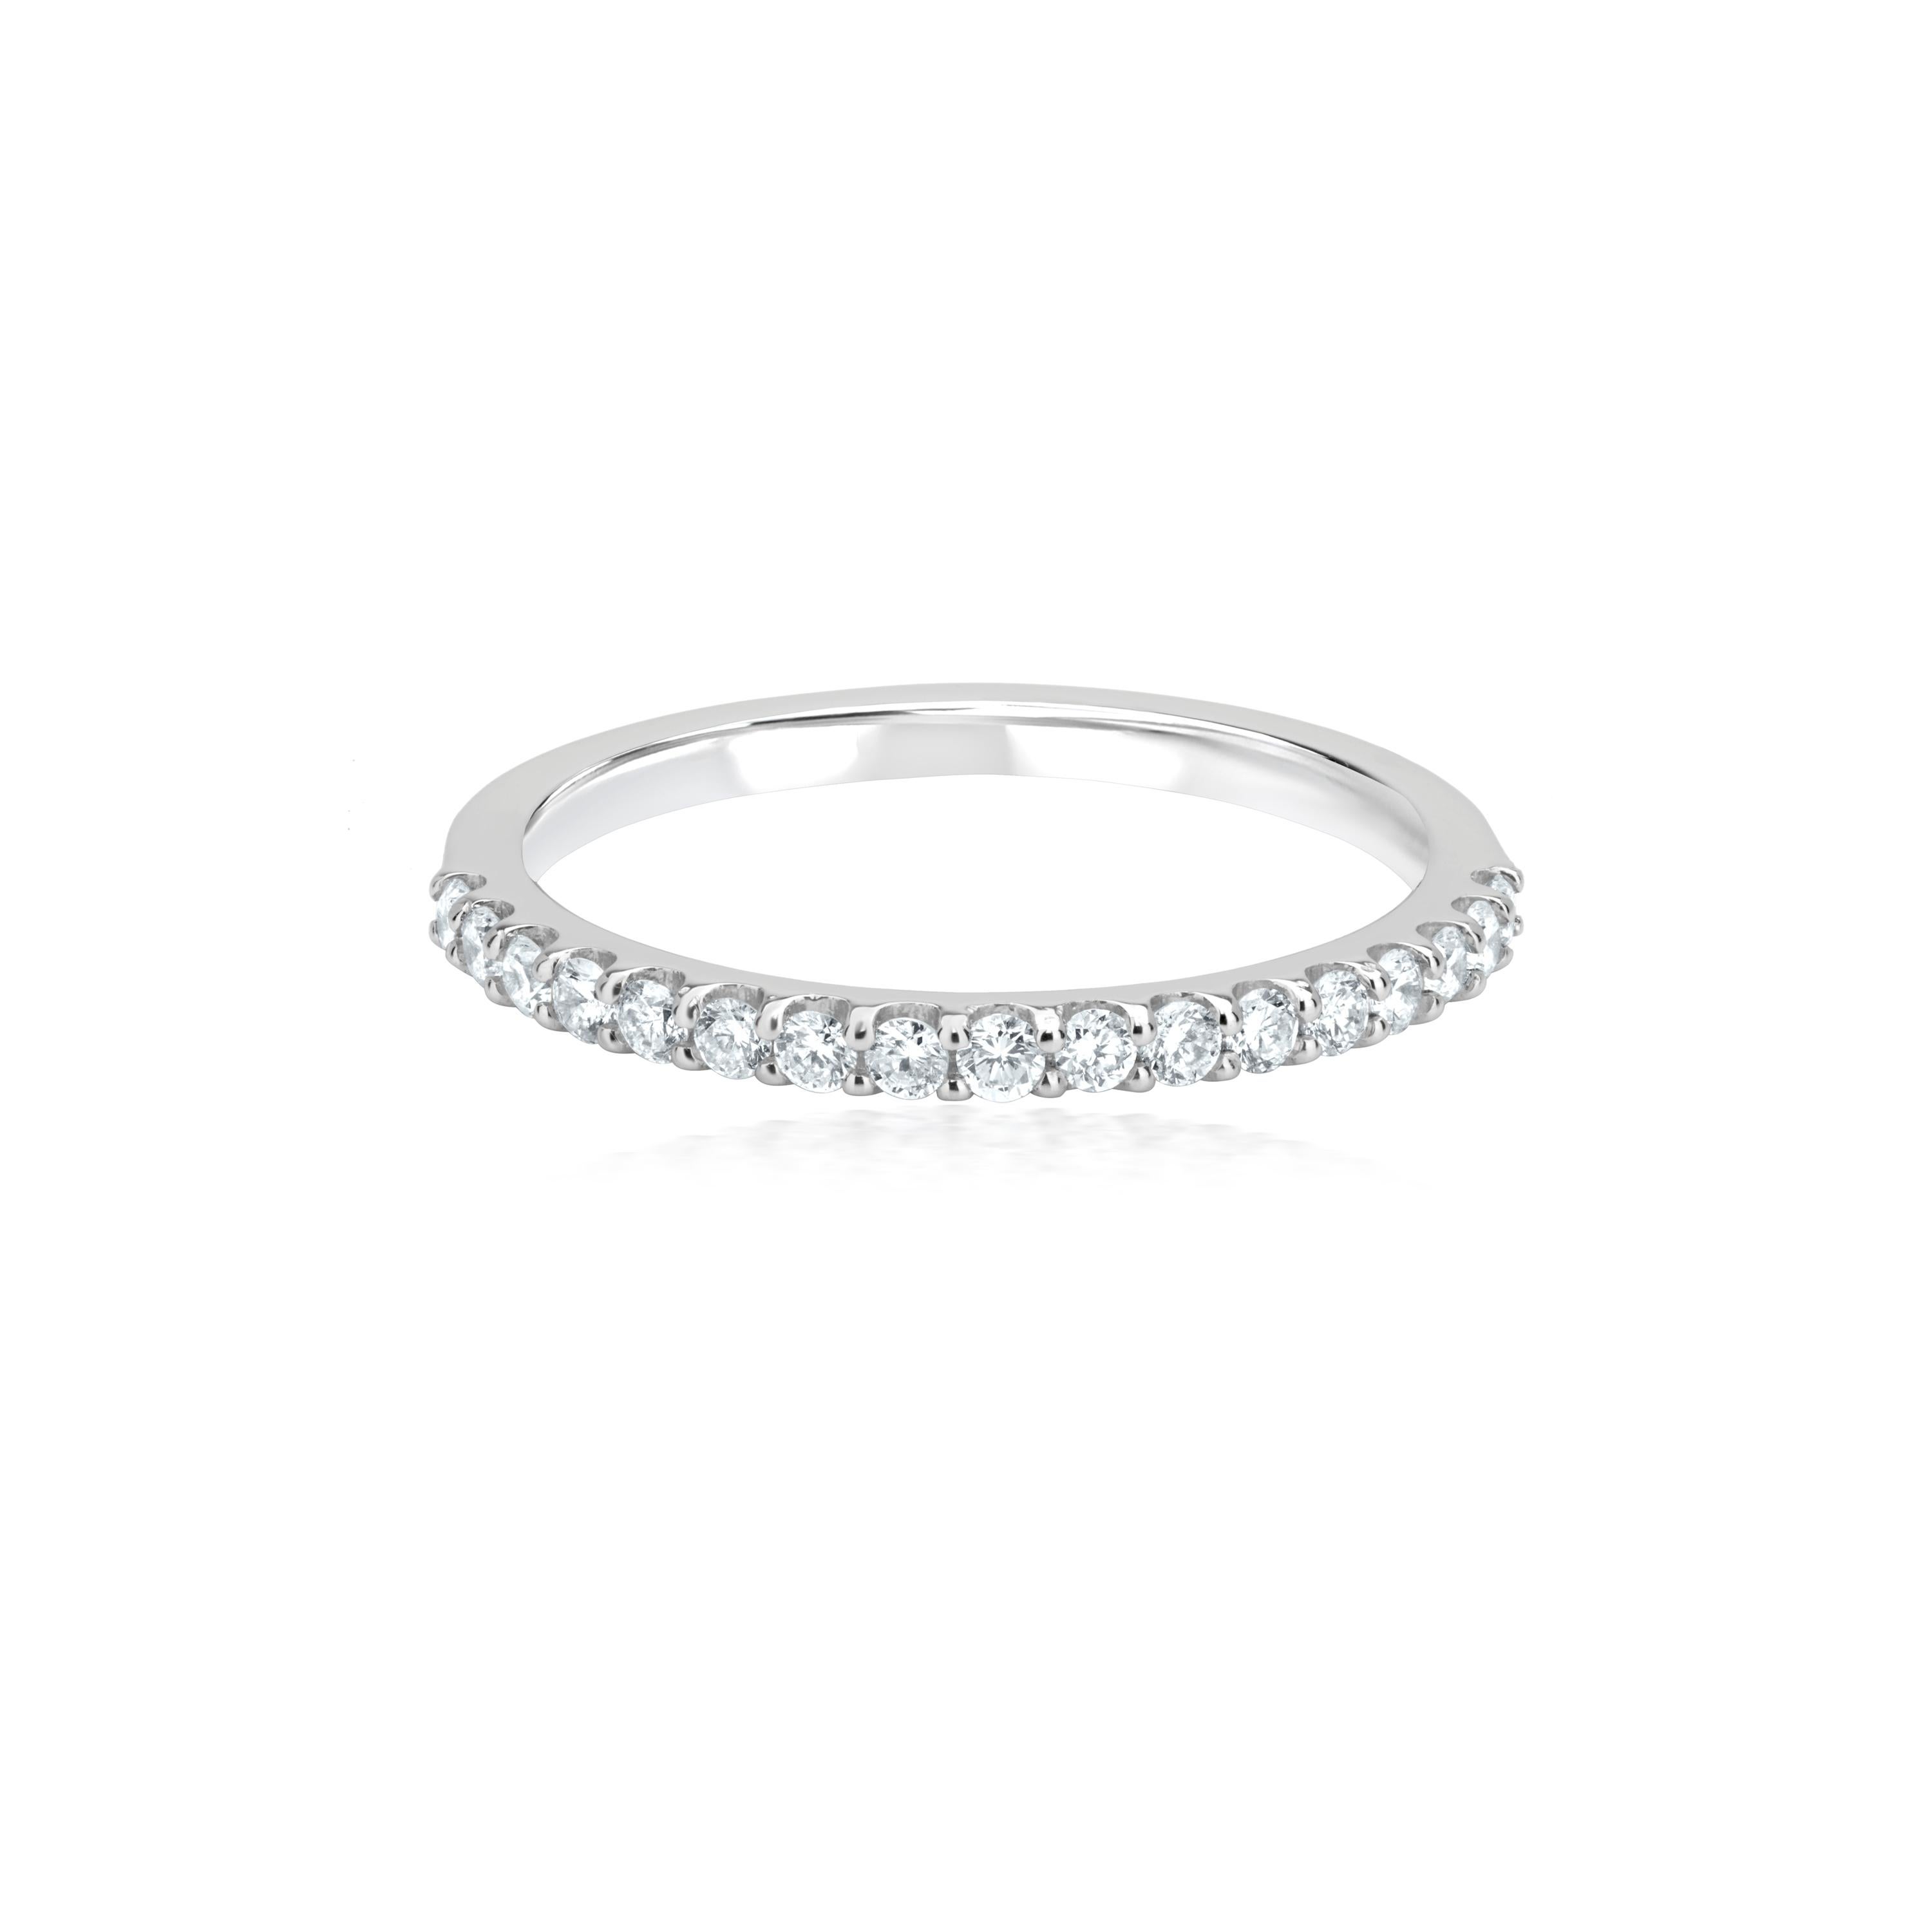 This elegant and understated band ring symbolizes an endless cycle of life, making it the ideal ring to mark your love for your spouse. This magnificent diamond ring by Luxle is embellished with round full-cut white diamonds in a micro pave setting.